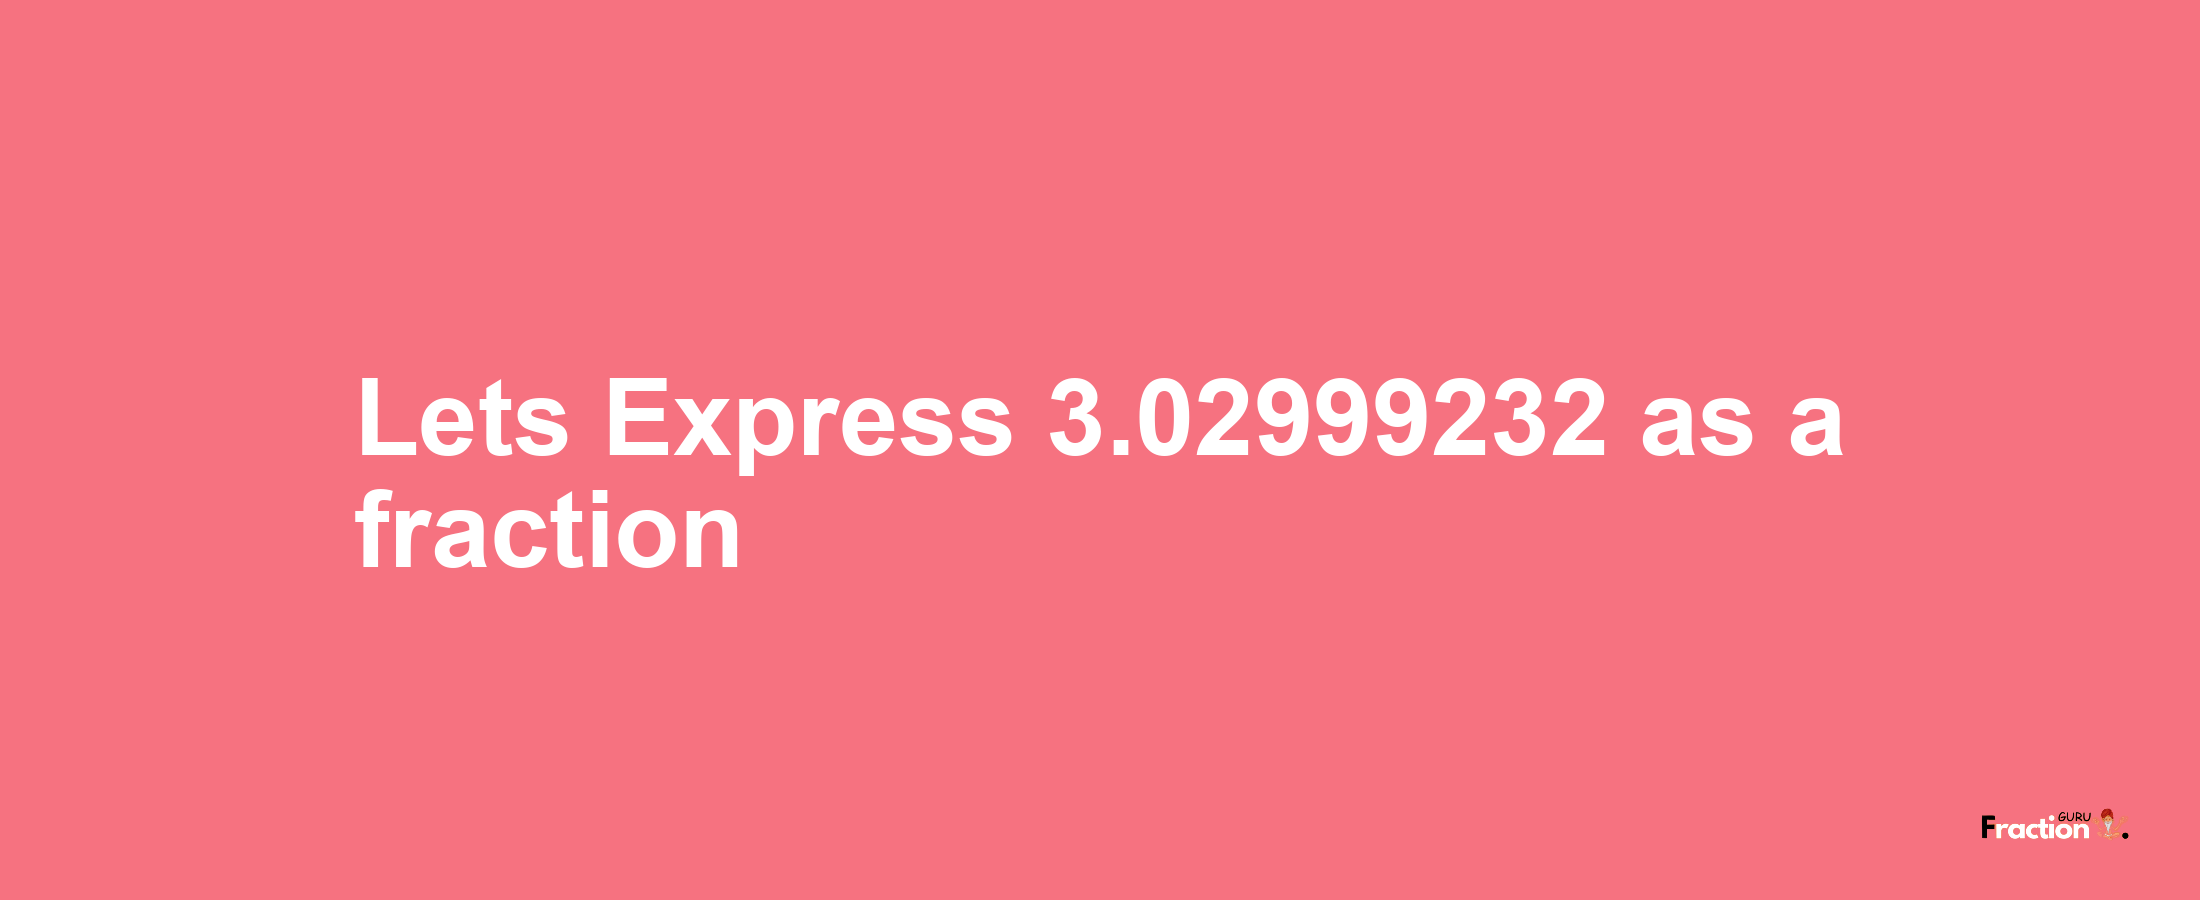 Lets Express 3.02999232 as afraction